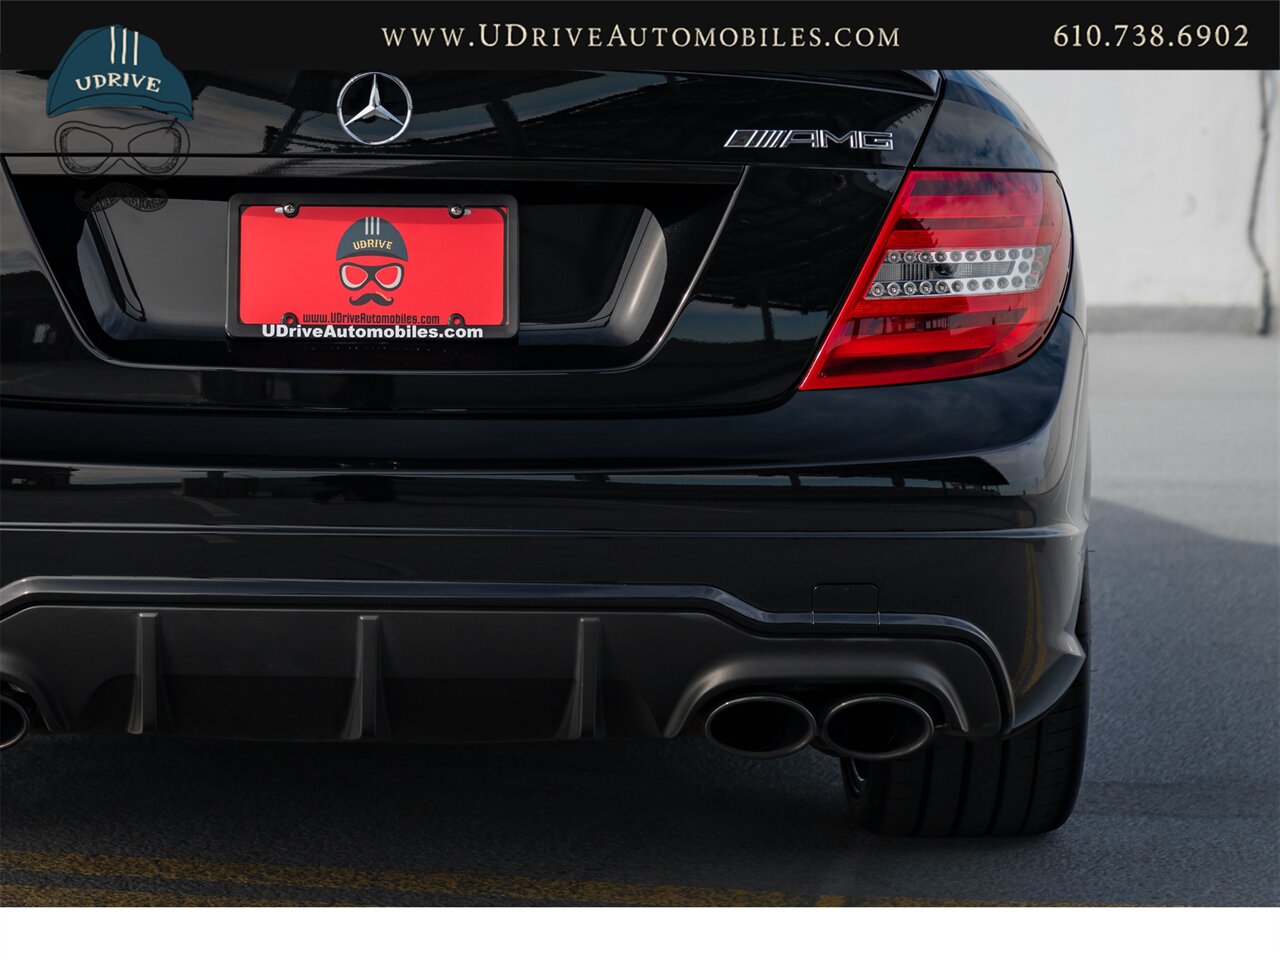 2015 Mercedes-Benz C63 AMG  Edition 507 17k Miles Pano Sunroof Locking Diff 507hp - Photo 20 - West Chester, PA 19382